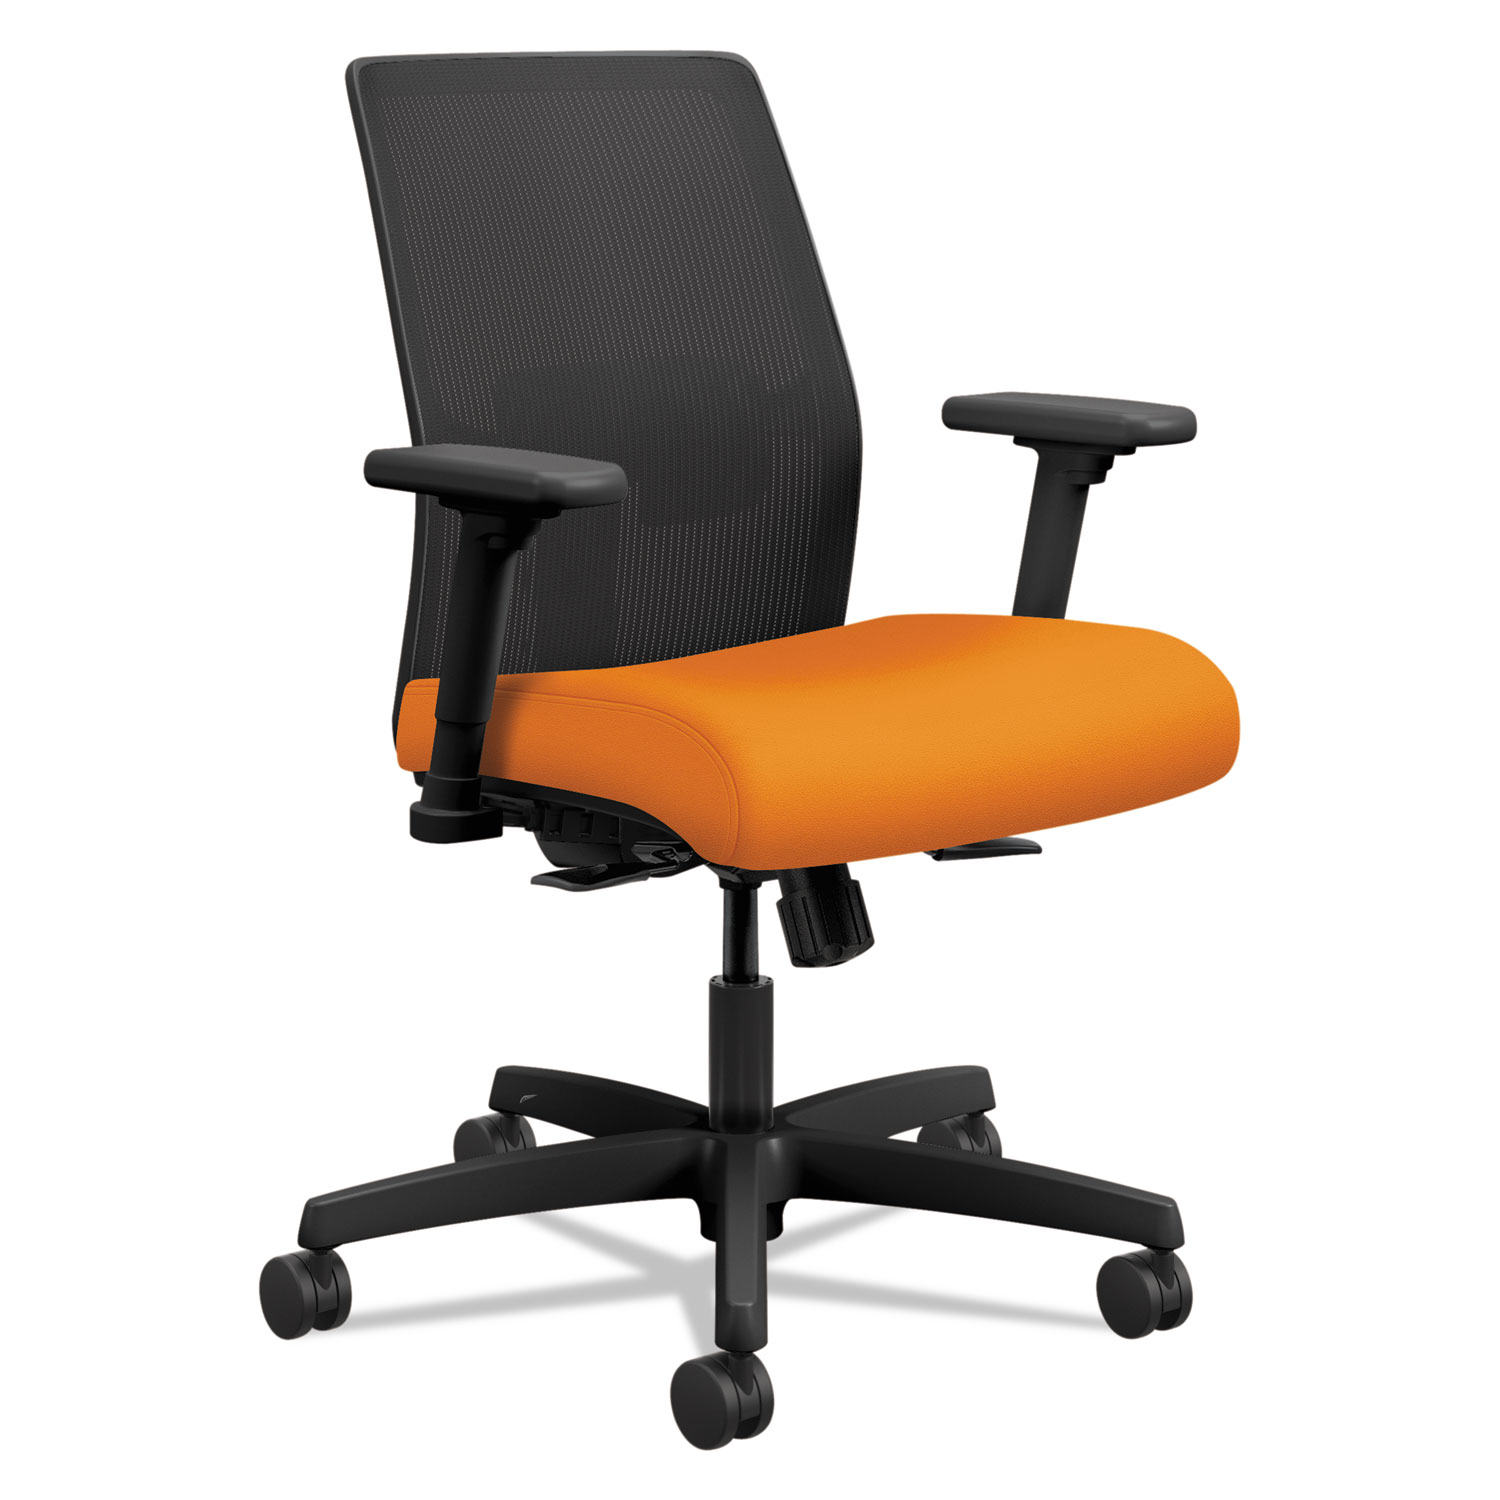  HON HONI2L1AMLC47TK Ignition 2.0 4-Way Stretch Low-Back Mesh Task Chair, Supports up to 300 lbs., Apricot Seat, Black Back/Base (HONI2L1AMLC47TK) 